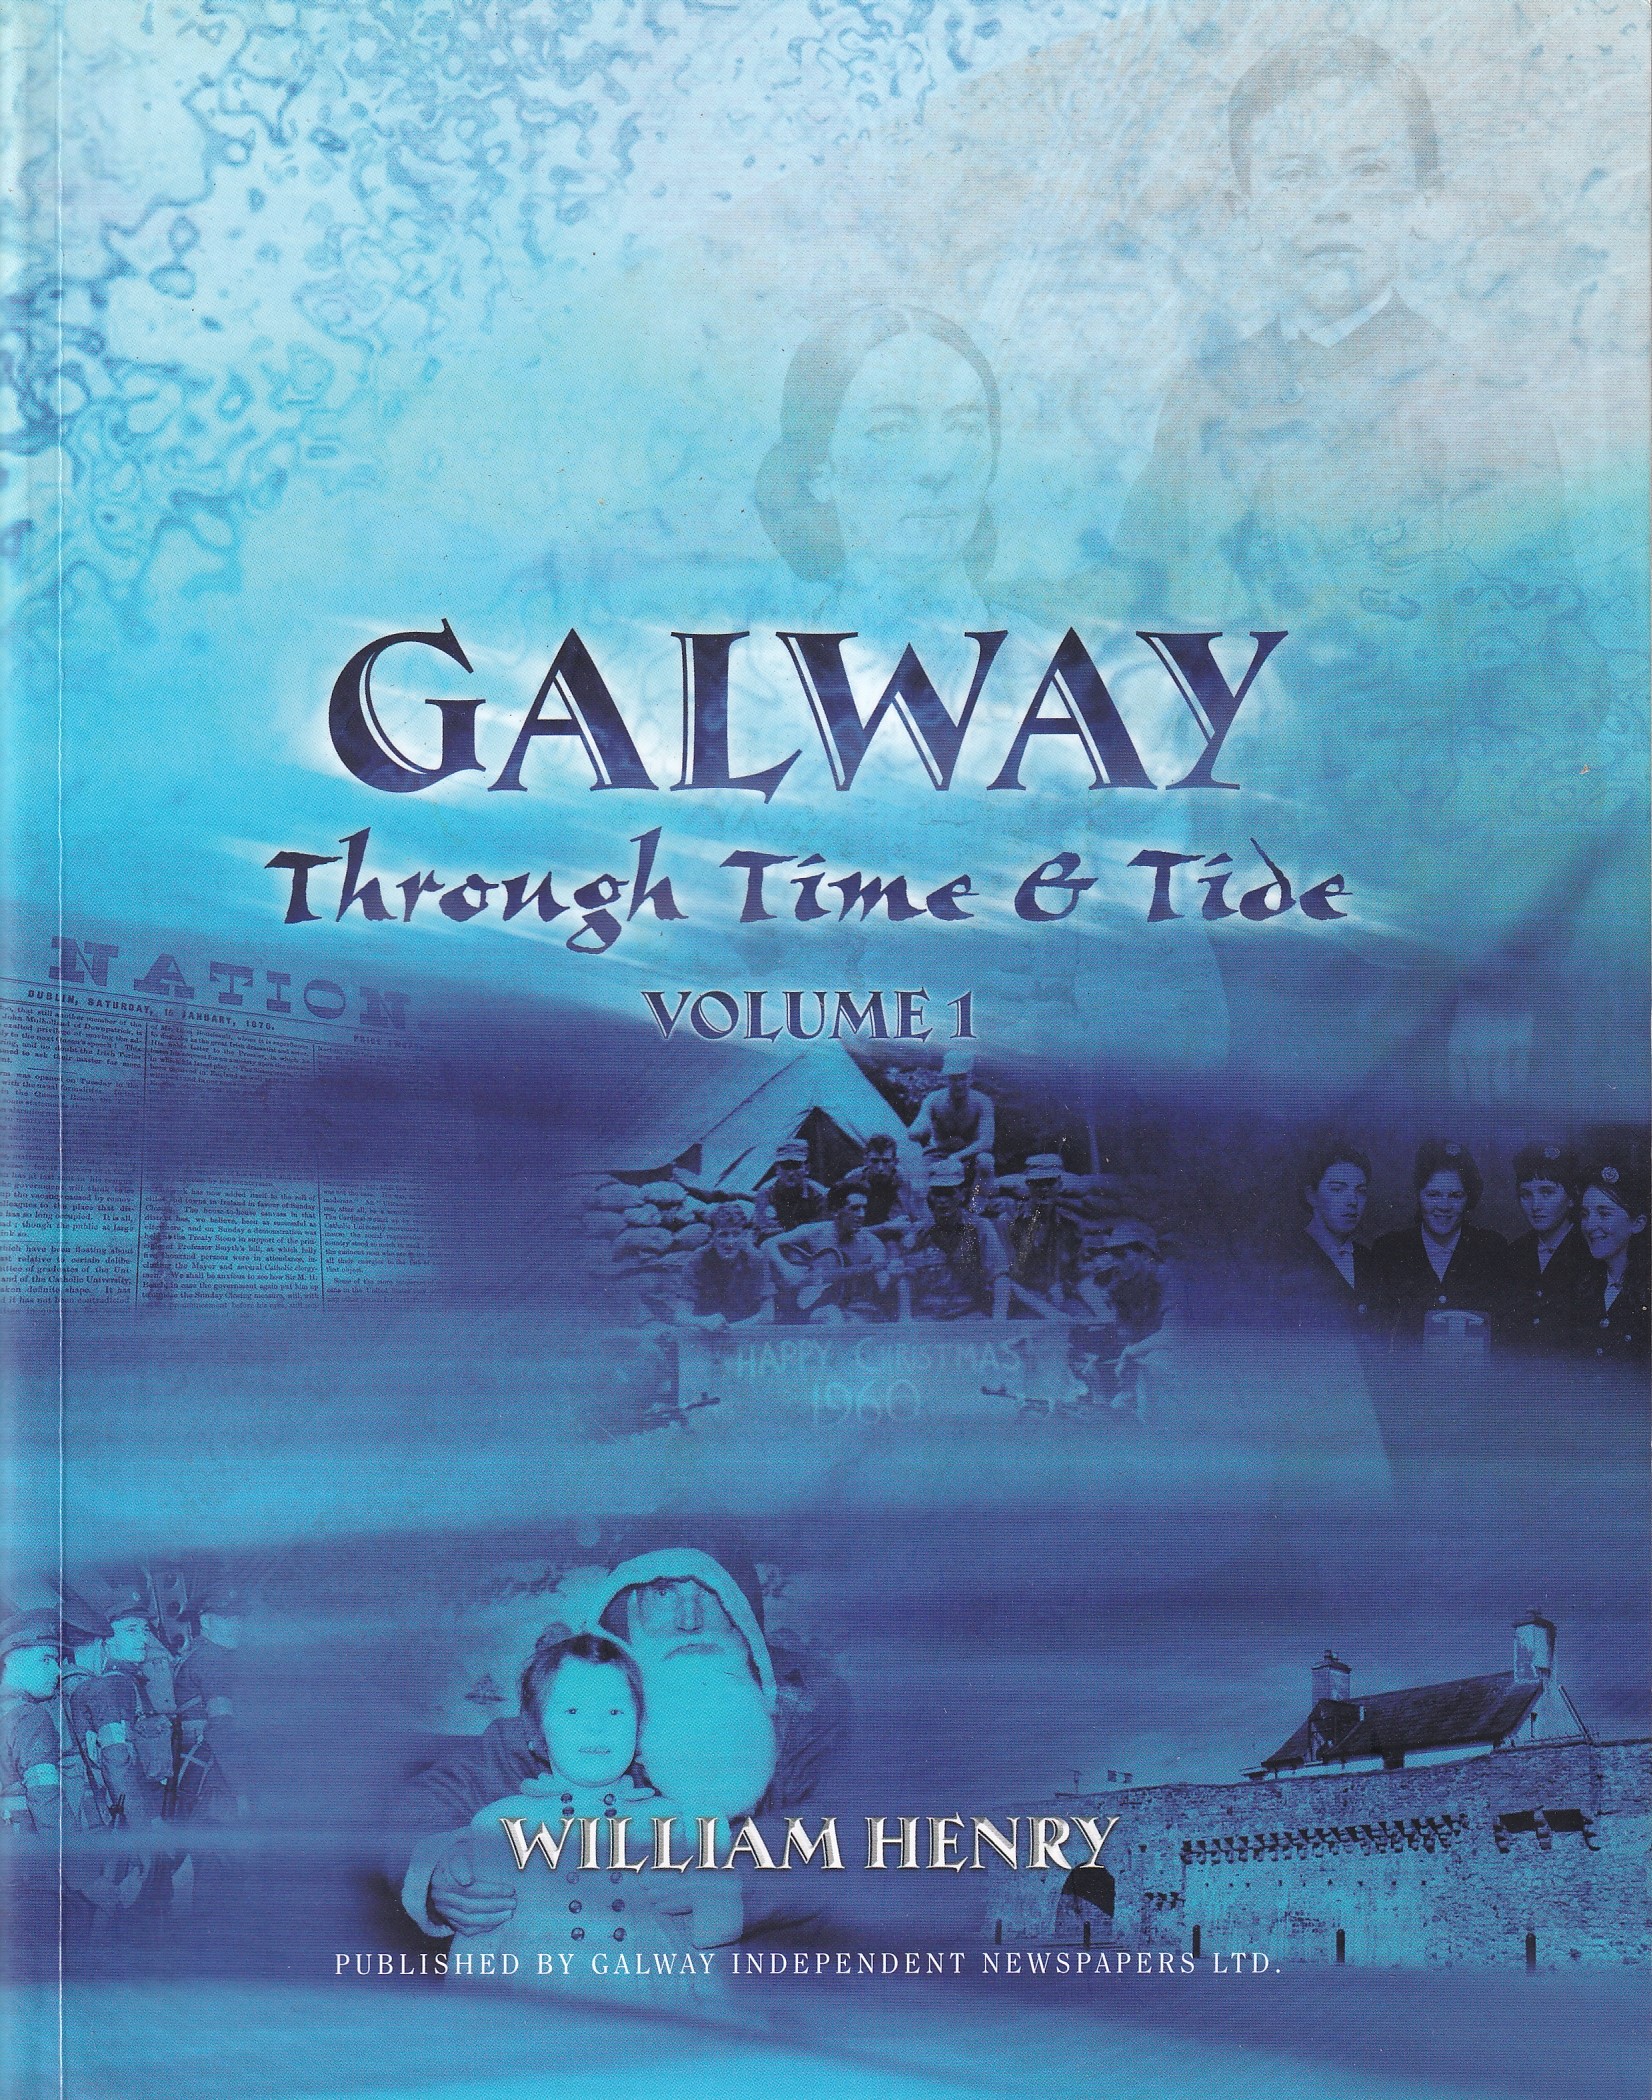 Galway: Through Time & Tide (Vol. 1) | William Henry | Charlie Byrne's